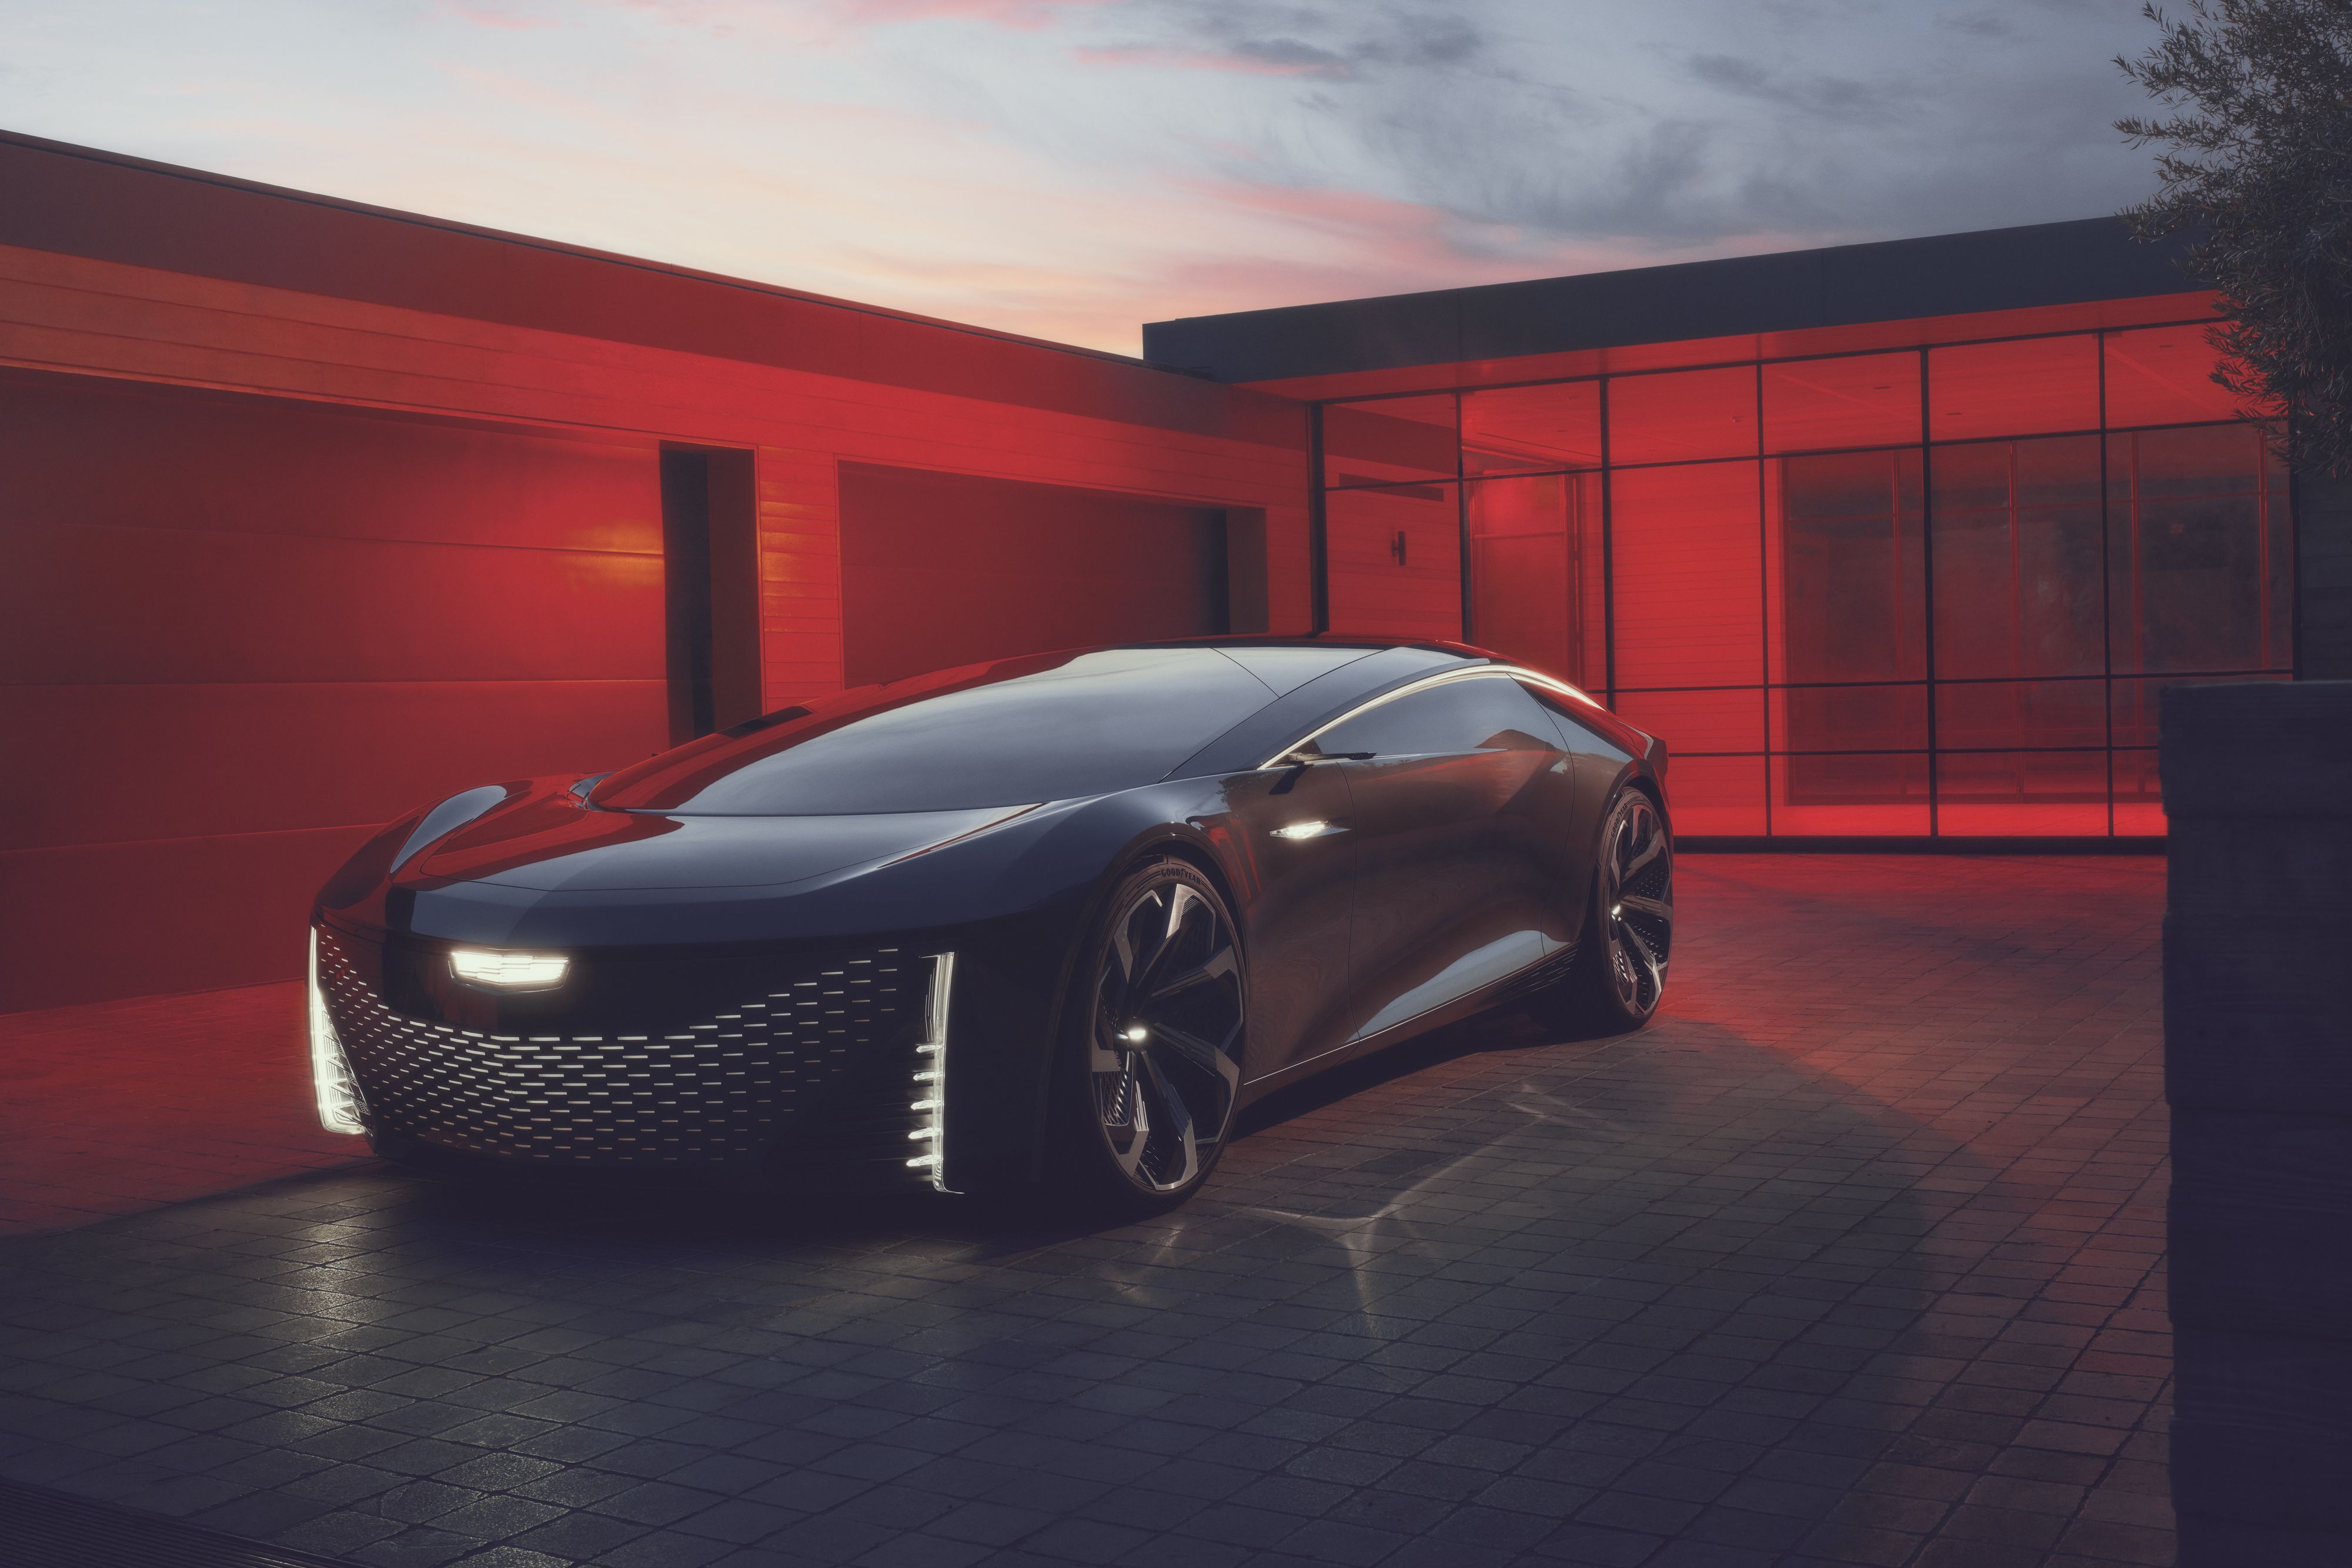 Cadillac InnerSpace Concept Is a Sleek Autonomous EV with a ...